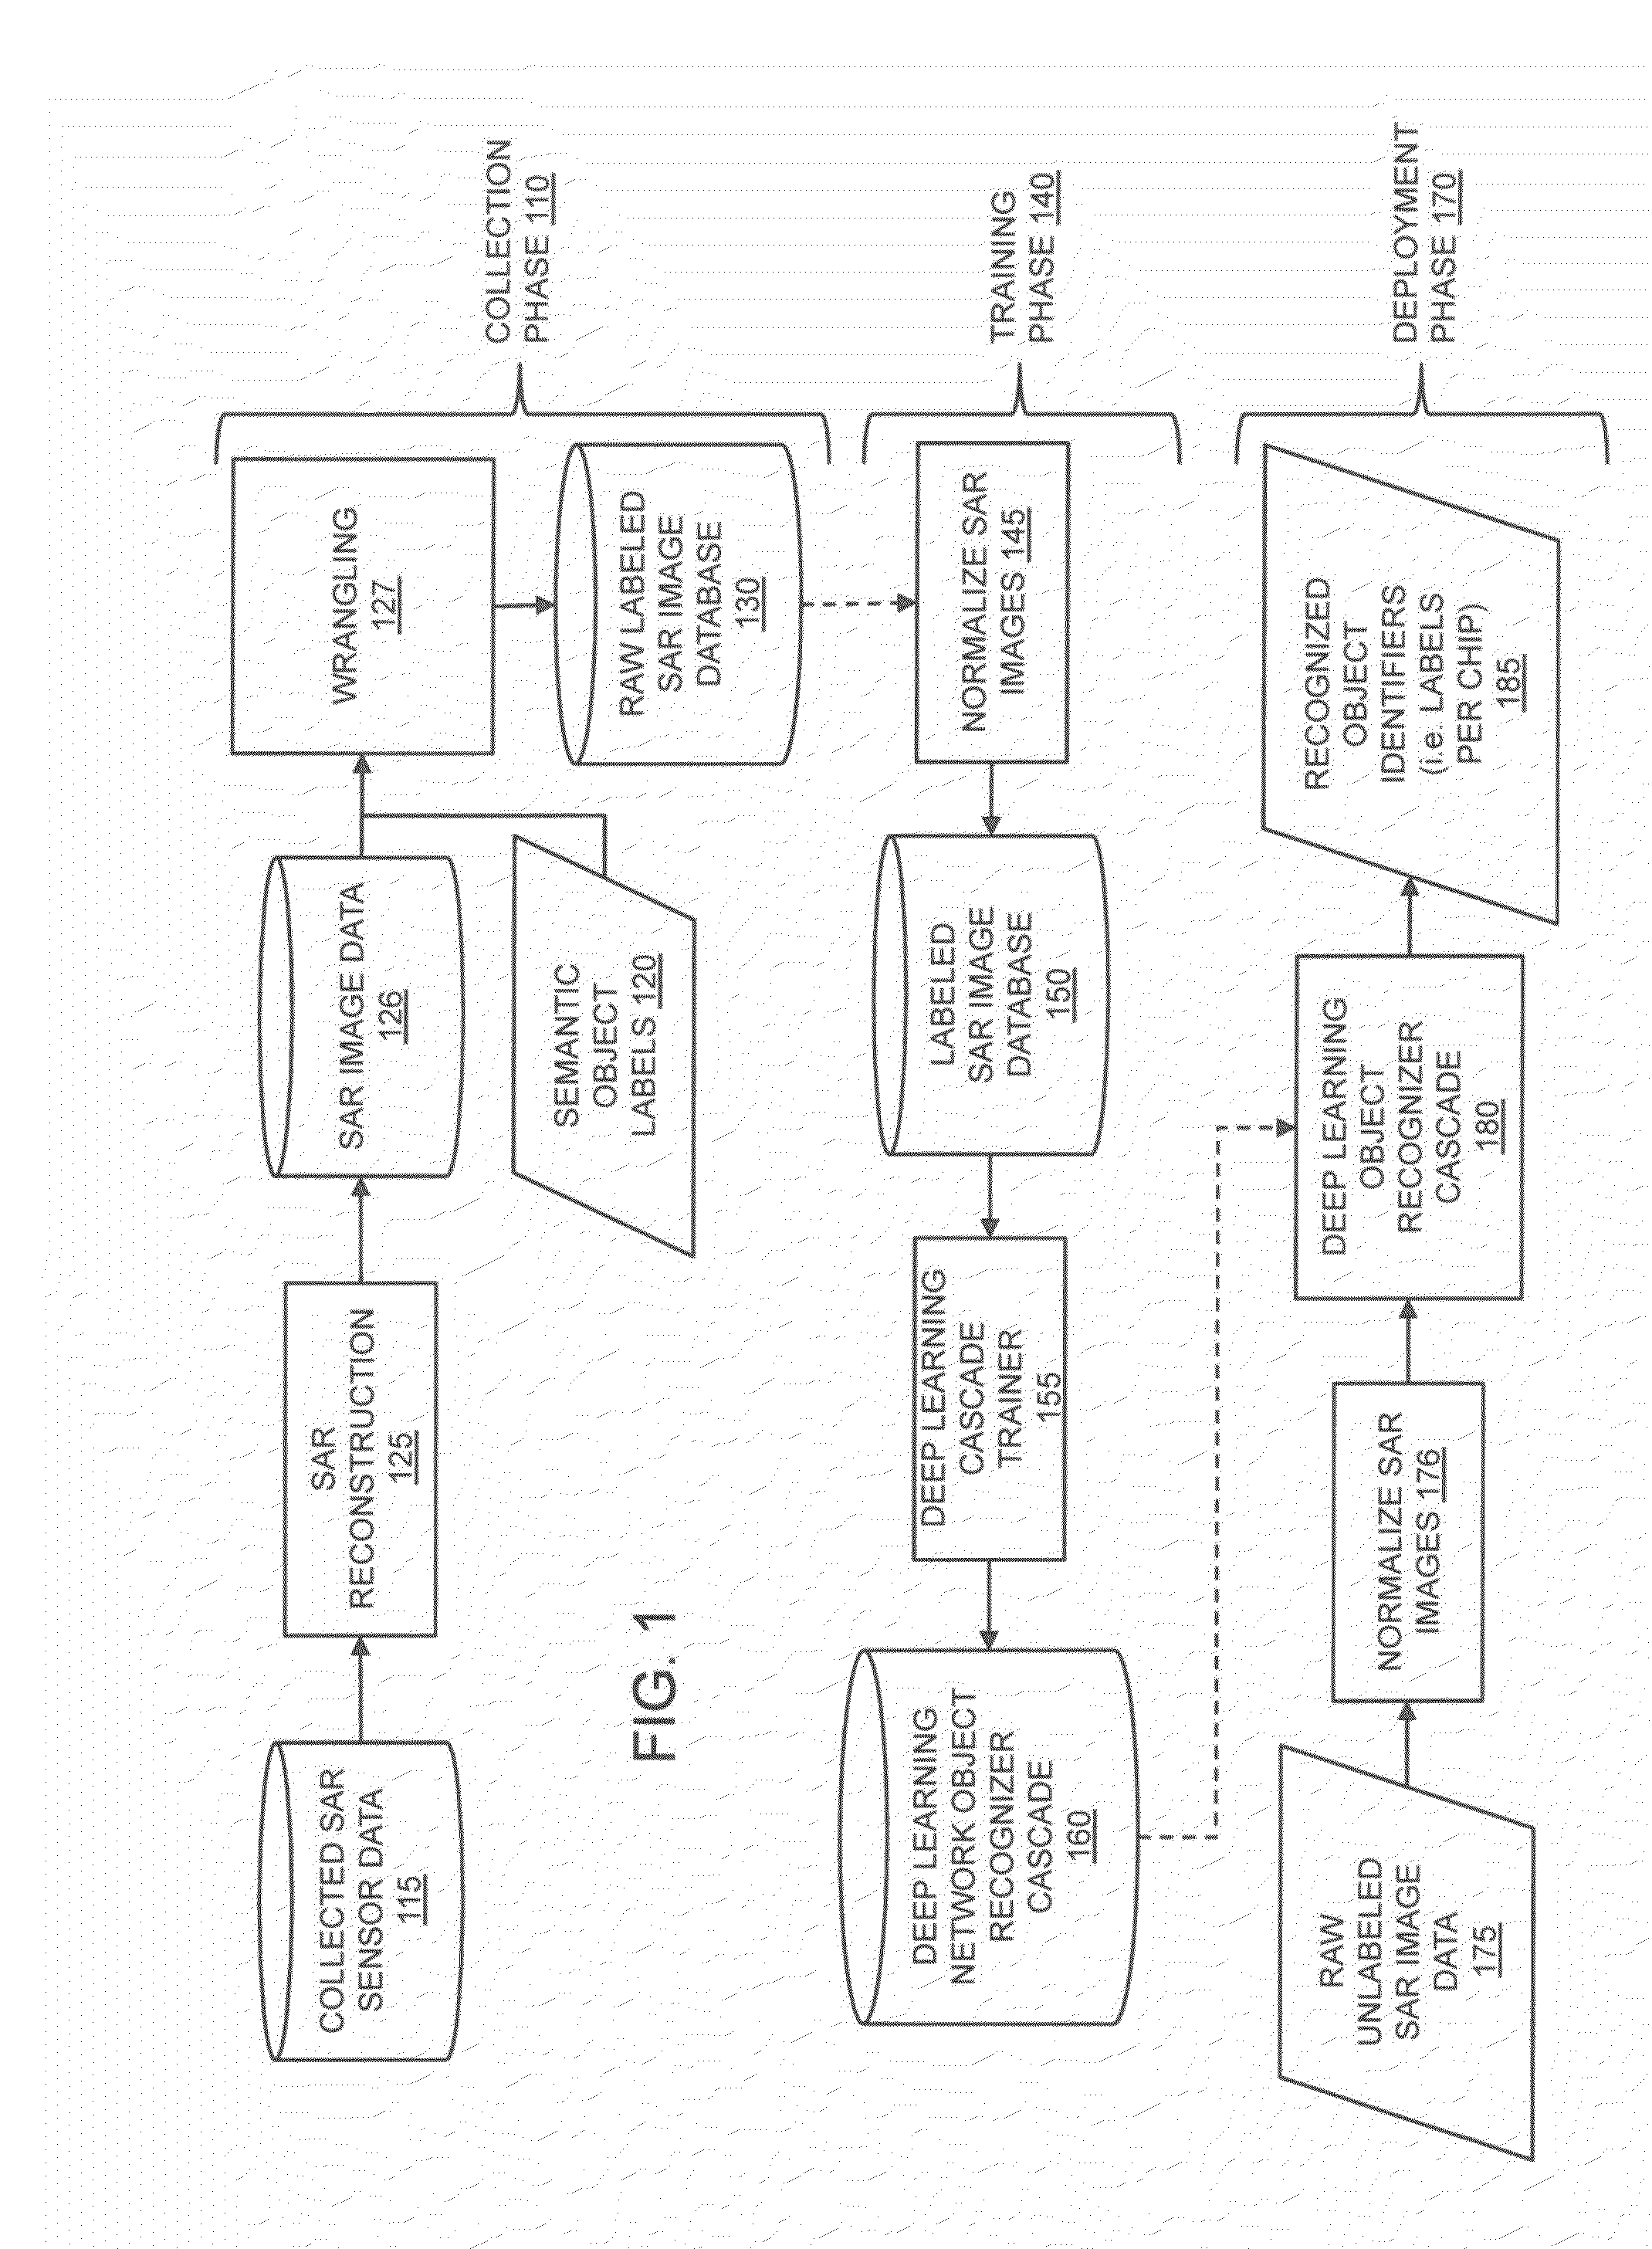 Systems and methods for recognizing objects in radar imagery